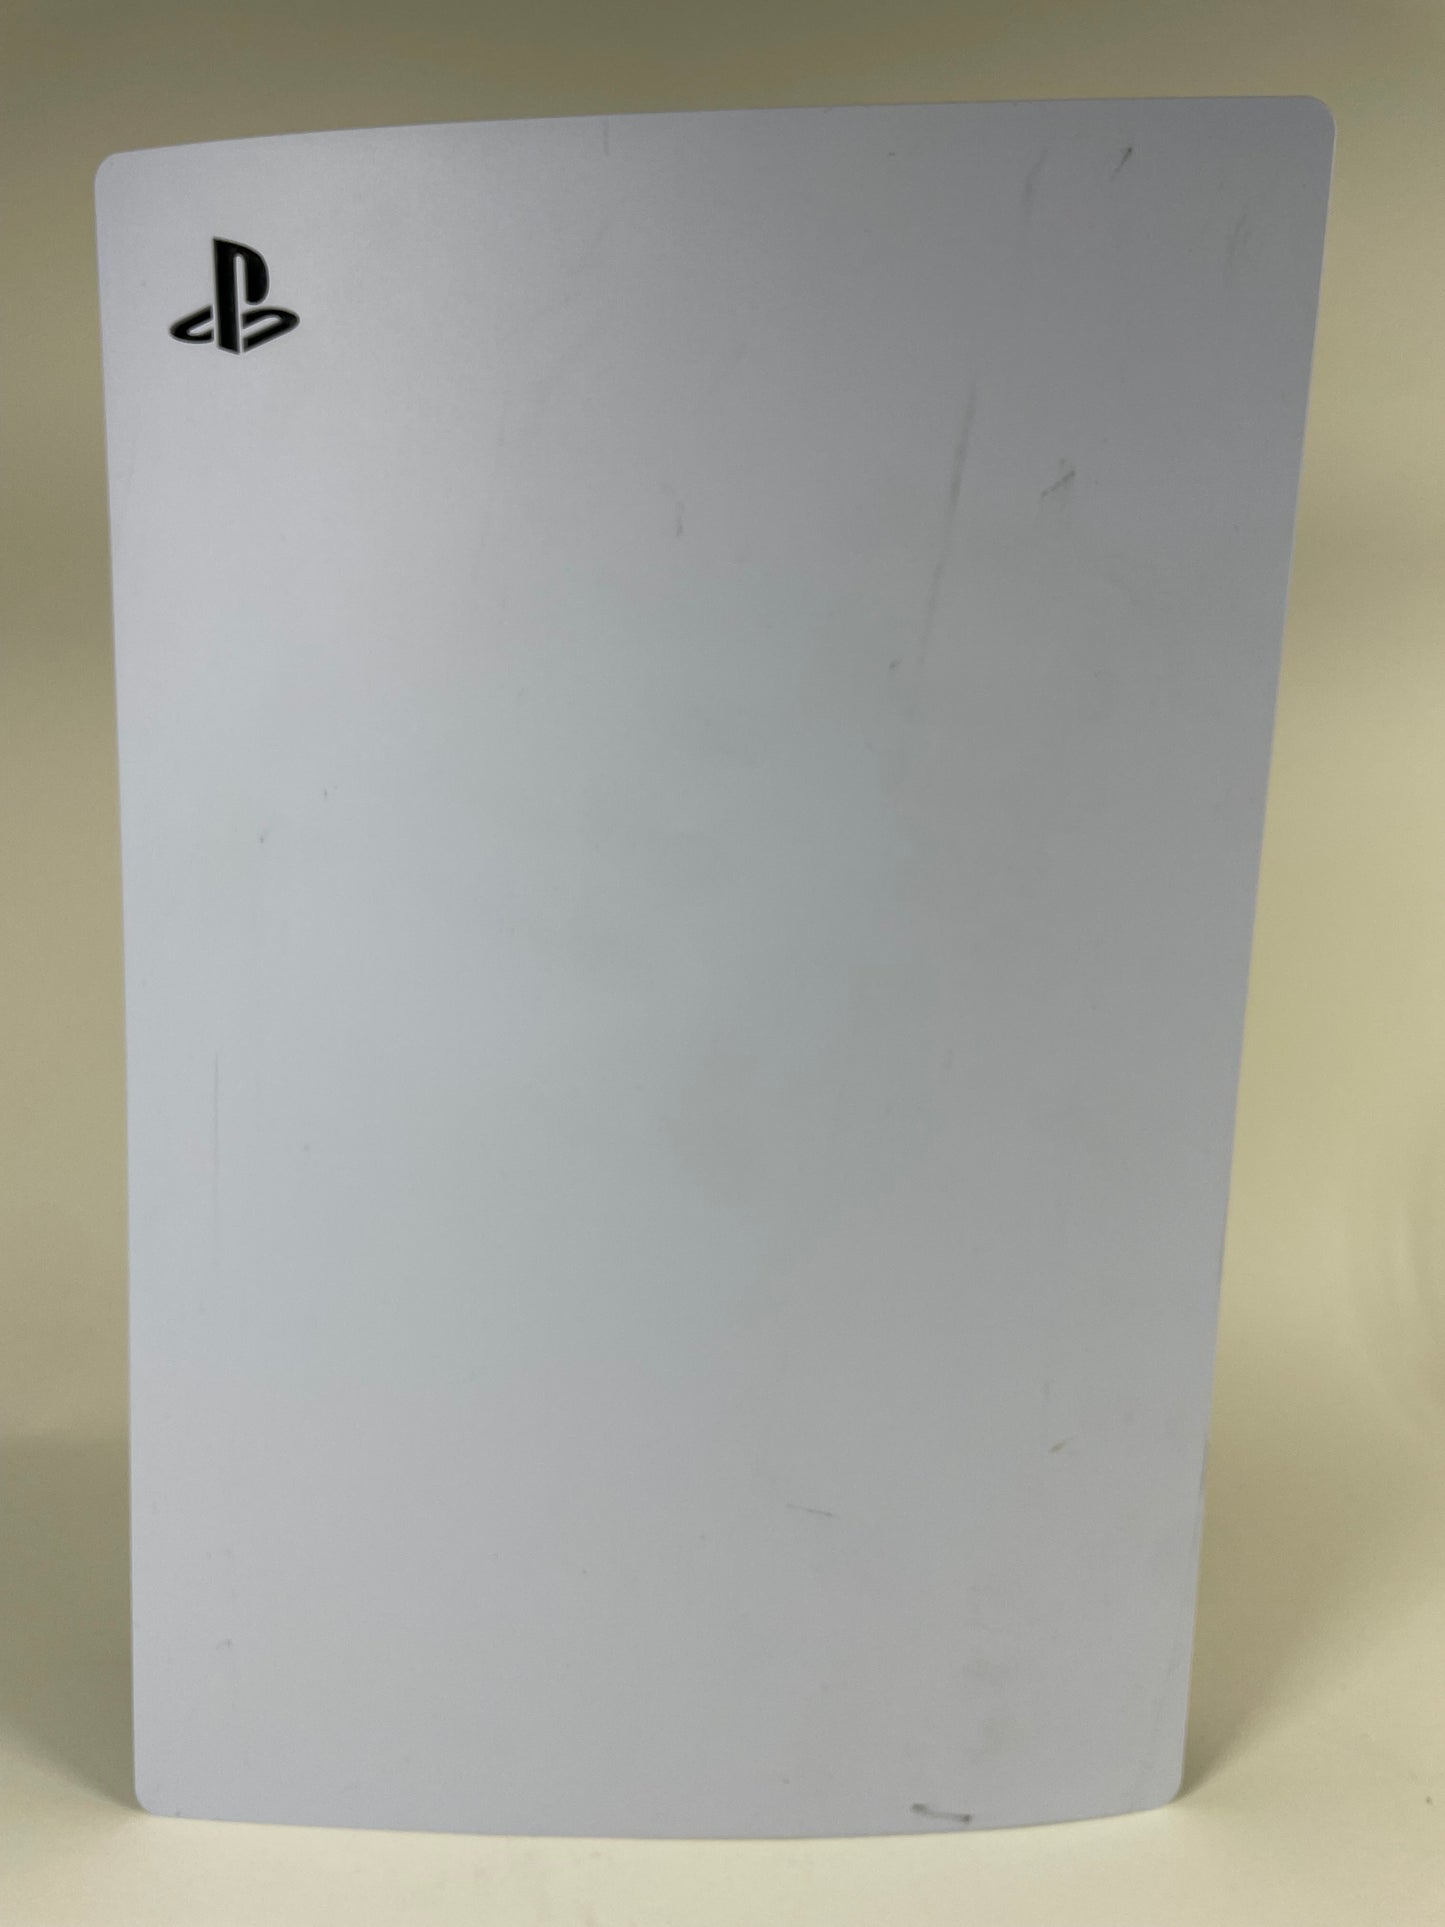 Sony PlayStation 5 Disc Edition PS5 825GB White Console Gaming System CFI-1215A